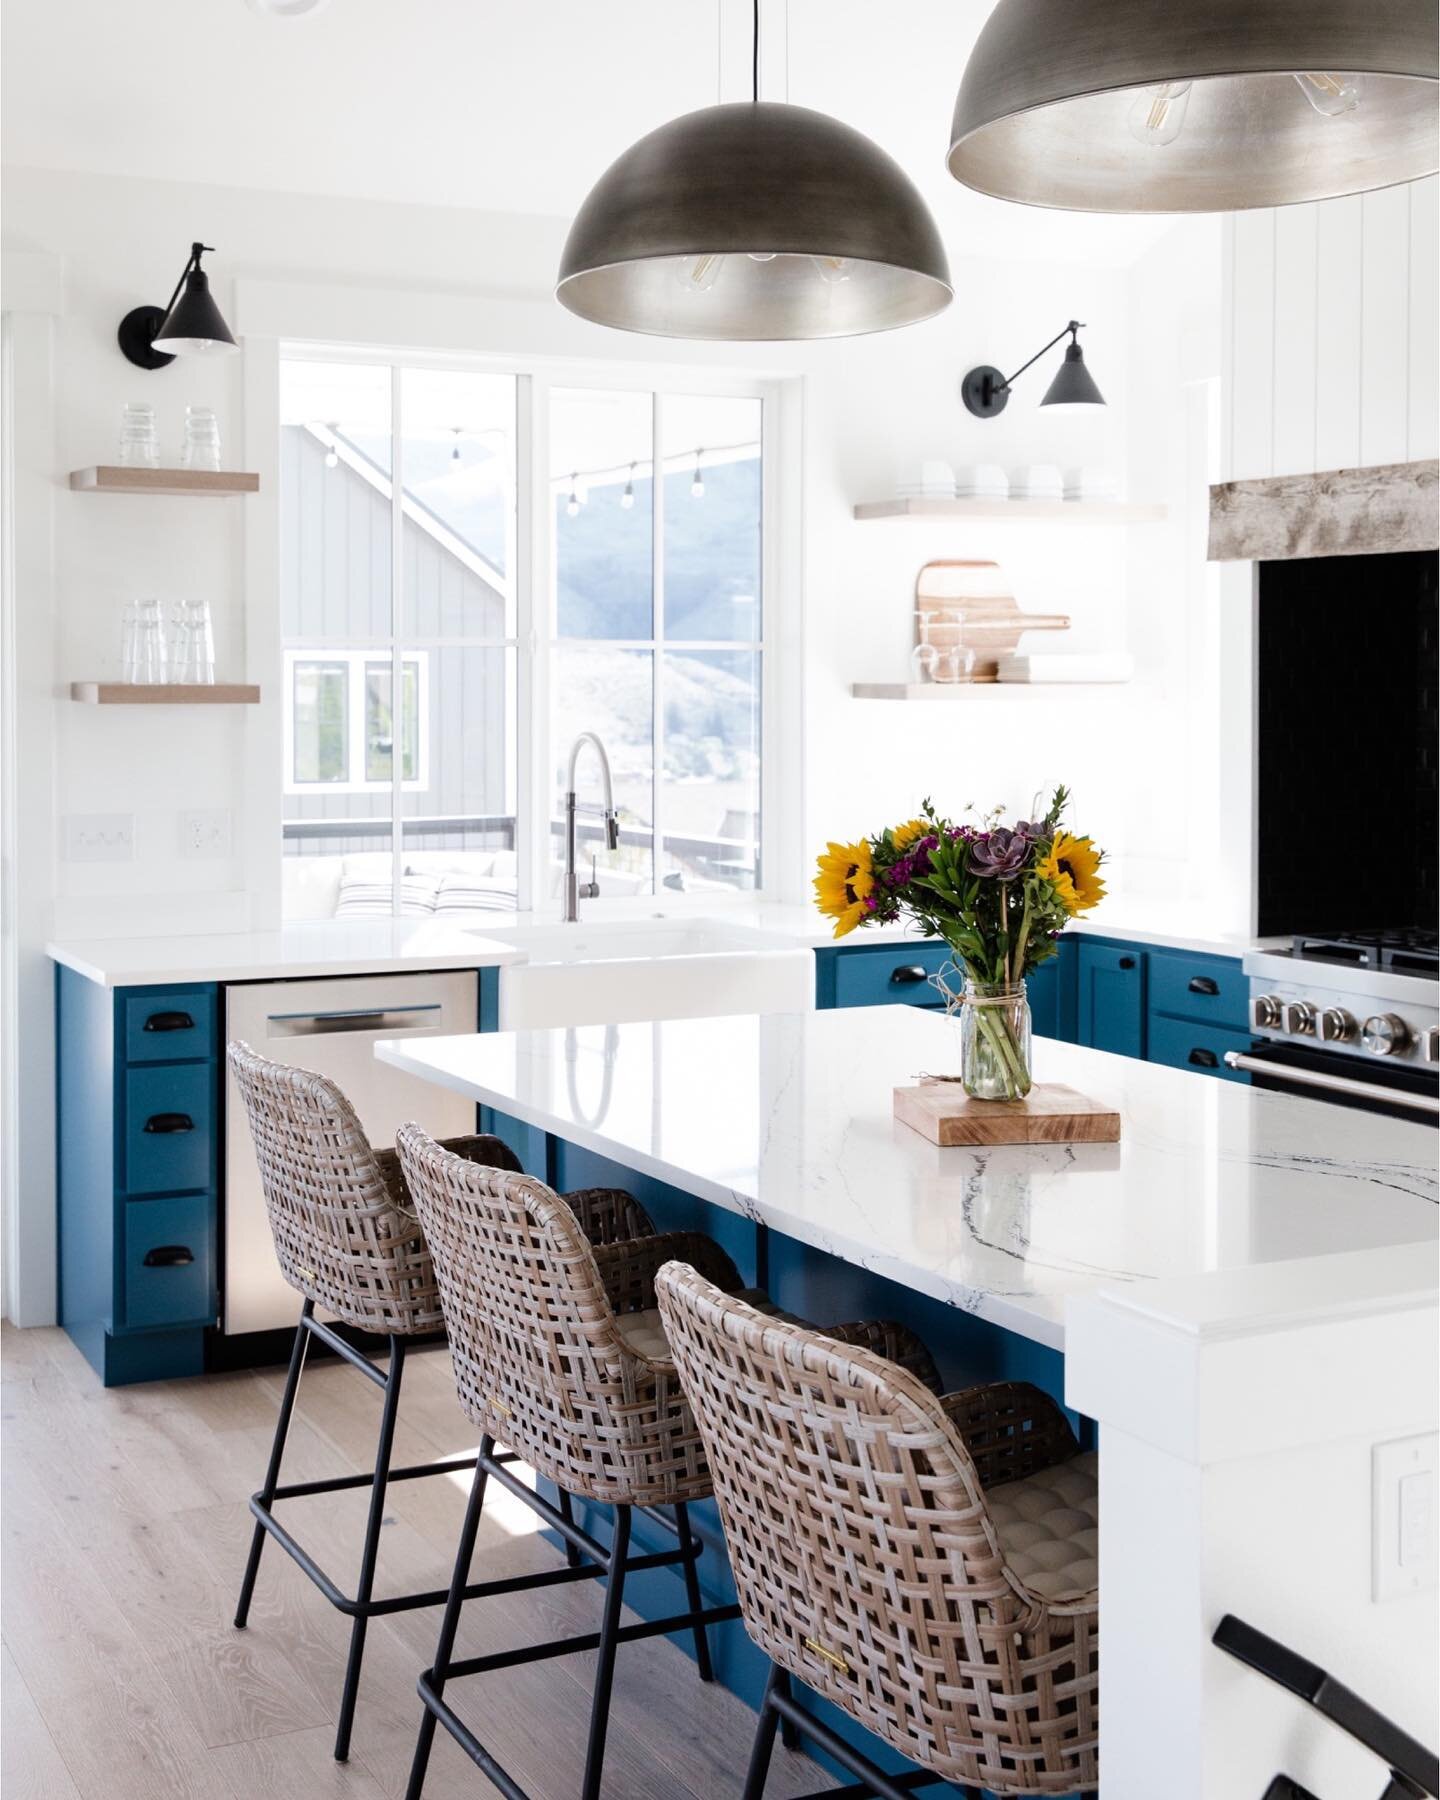 Chelan lake house designed by @mandycallawayinteriors. What a fun day and a beautiful space with unique details like salvaged wood accents in both the exterior and exterior. The indoor/outdoor design is perfect for summer breezes and day-into-night g